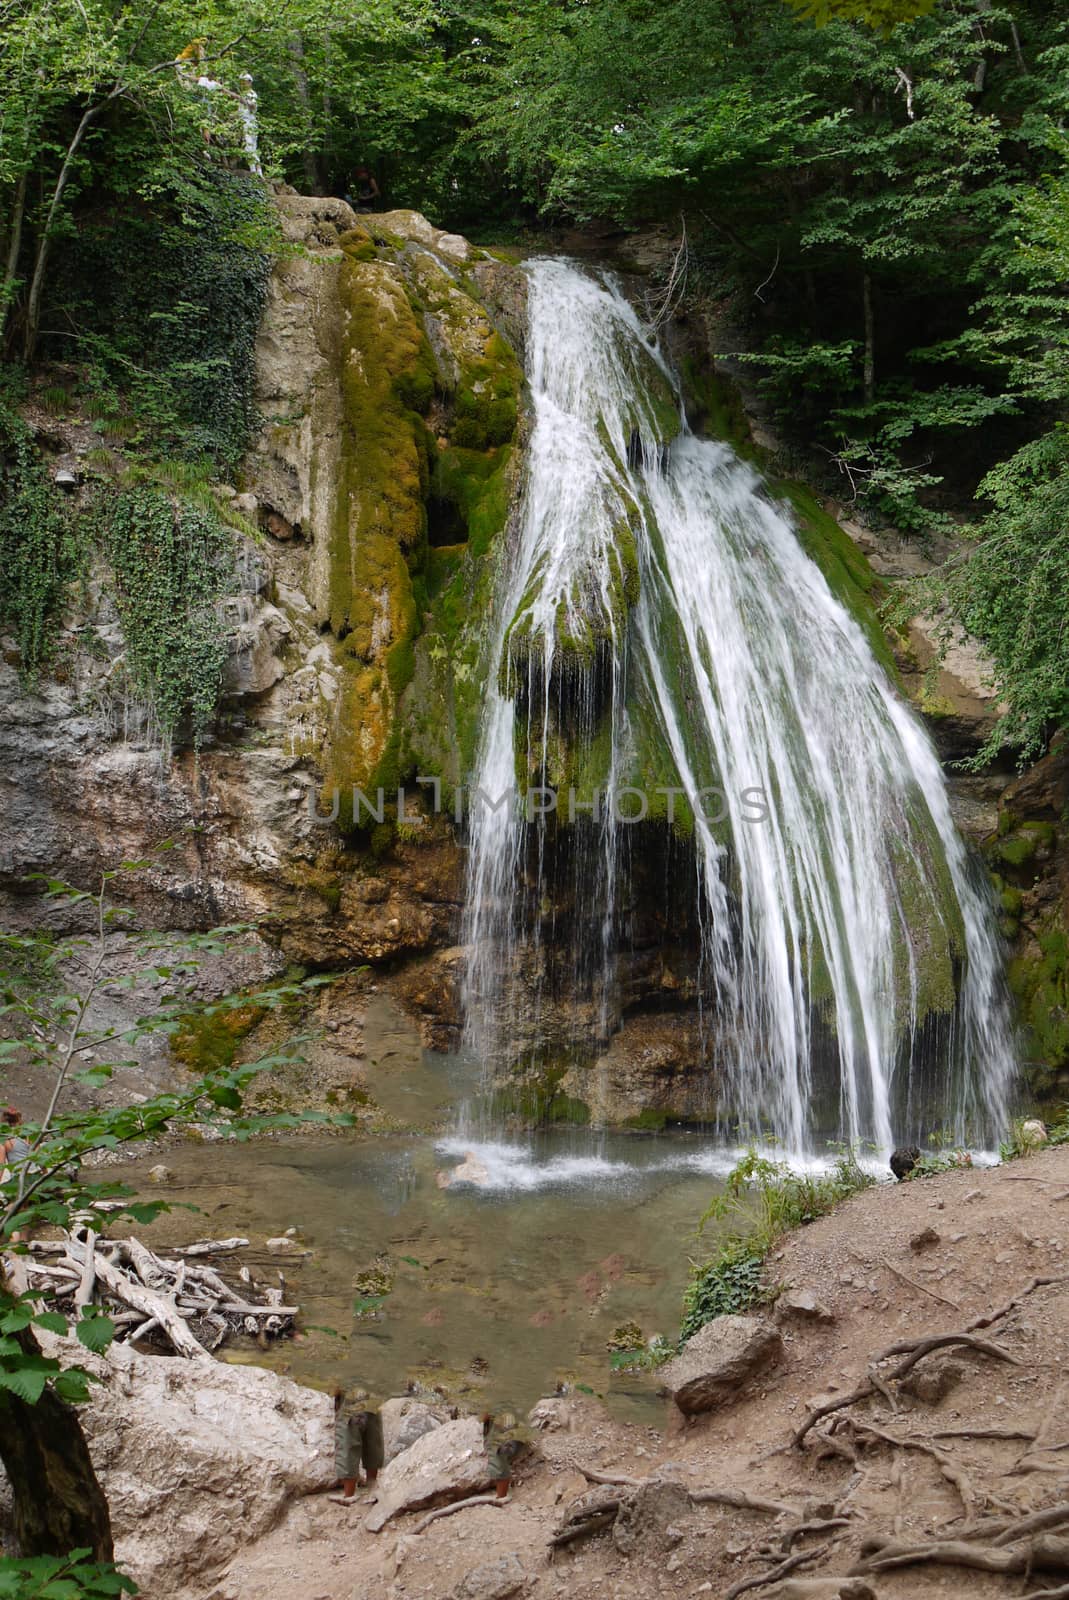 A large picturesque waterfall overgrown with moss and other vegetation falling from a rocky mountain